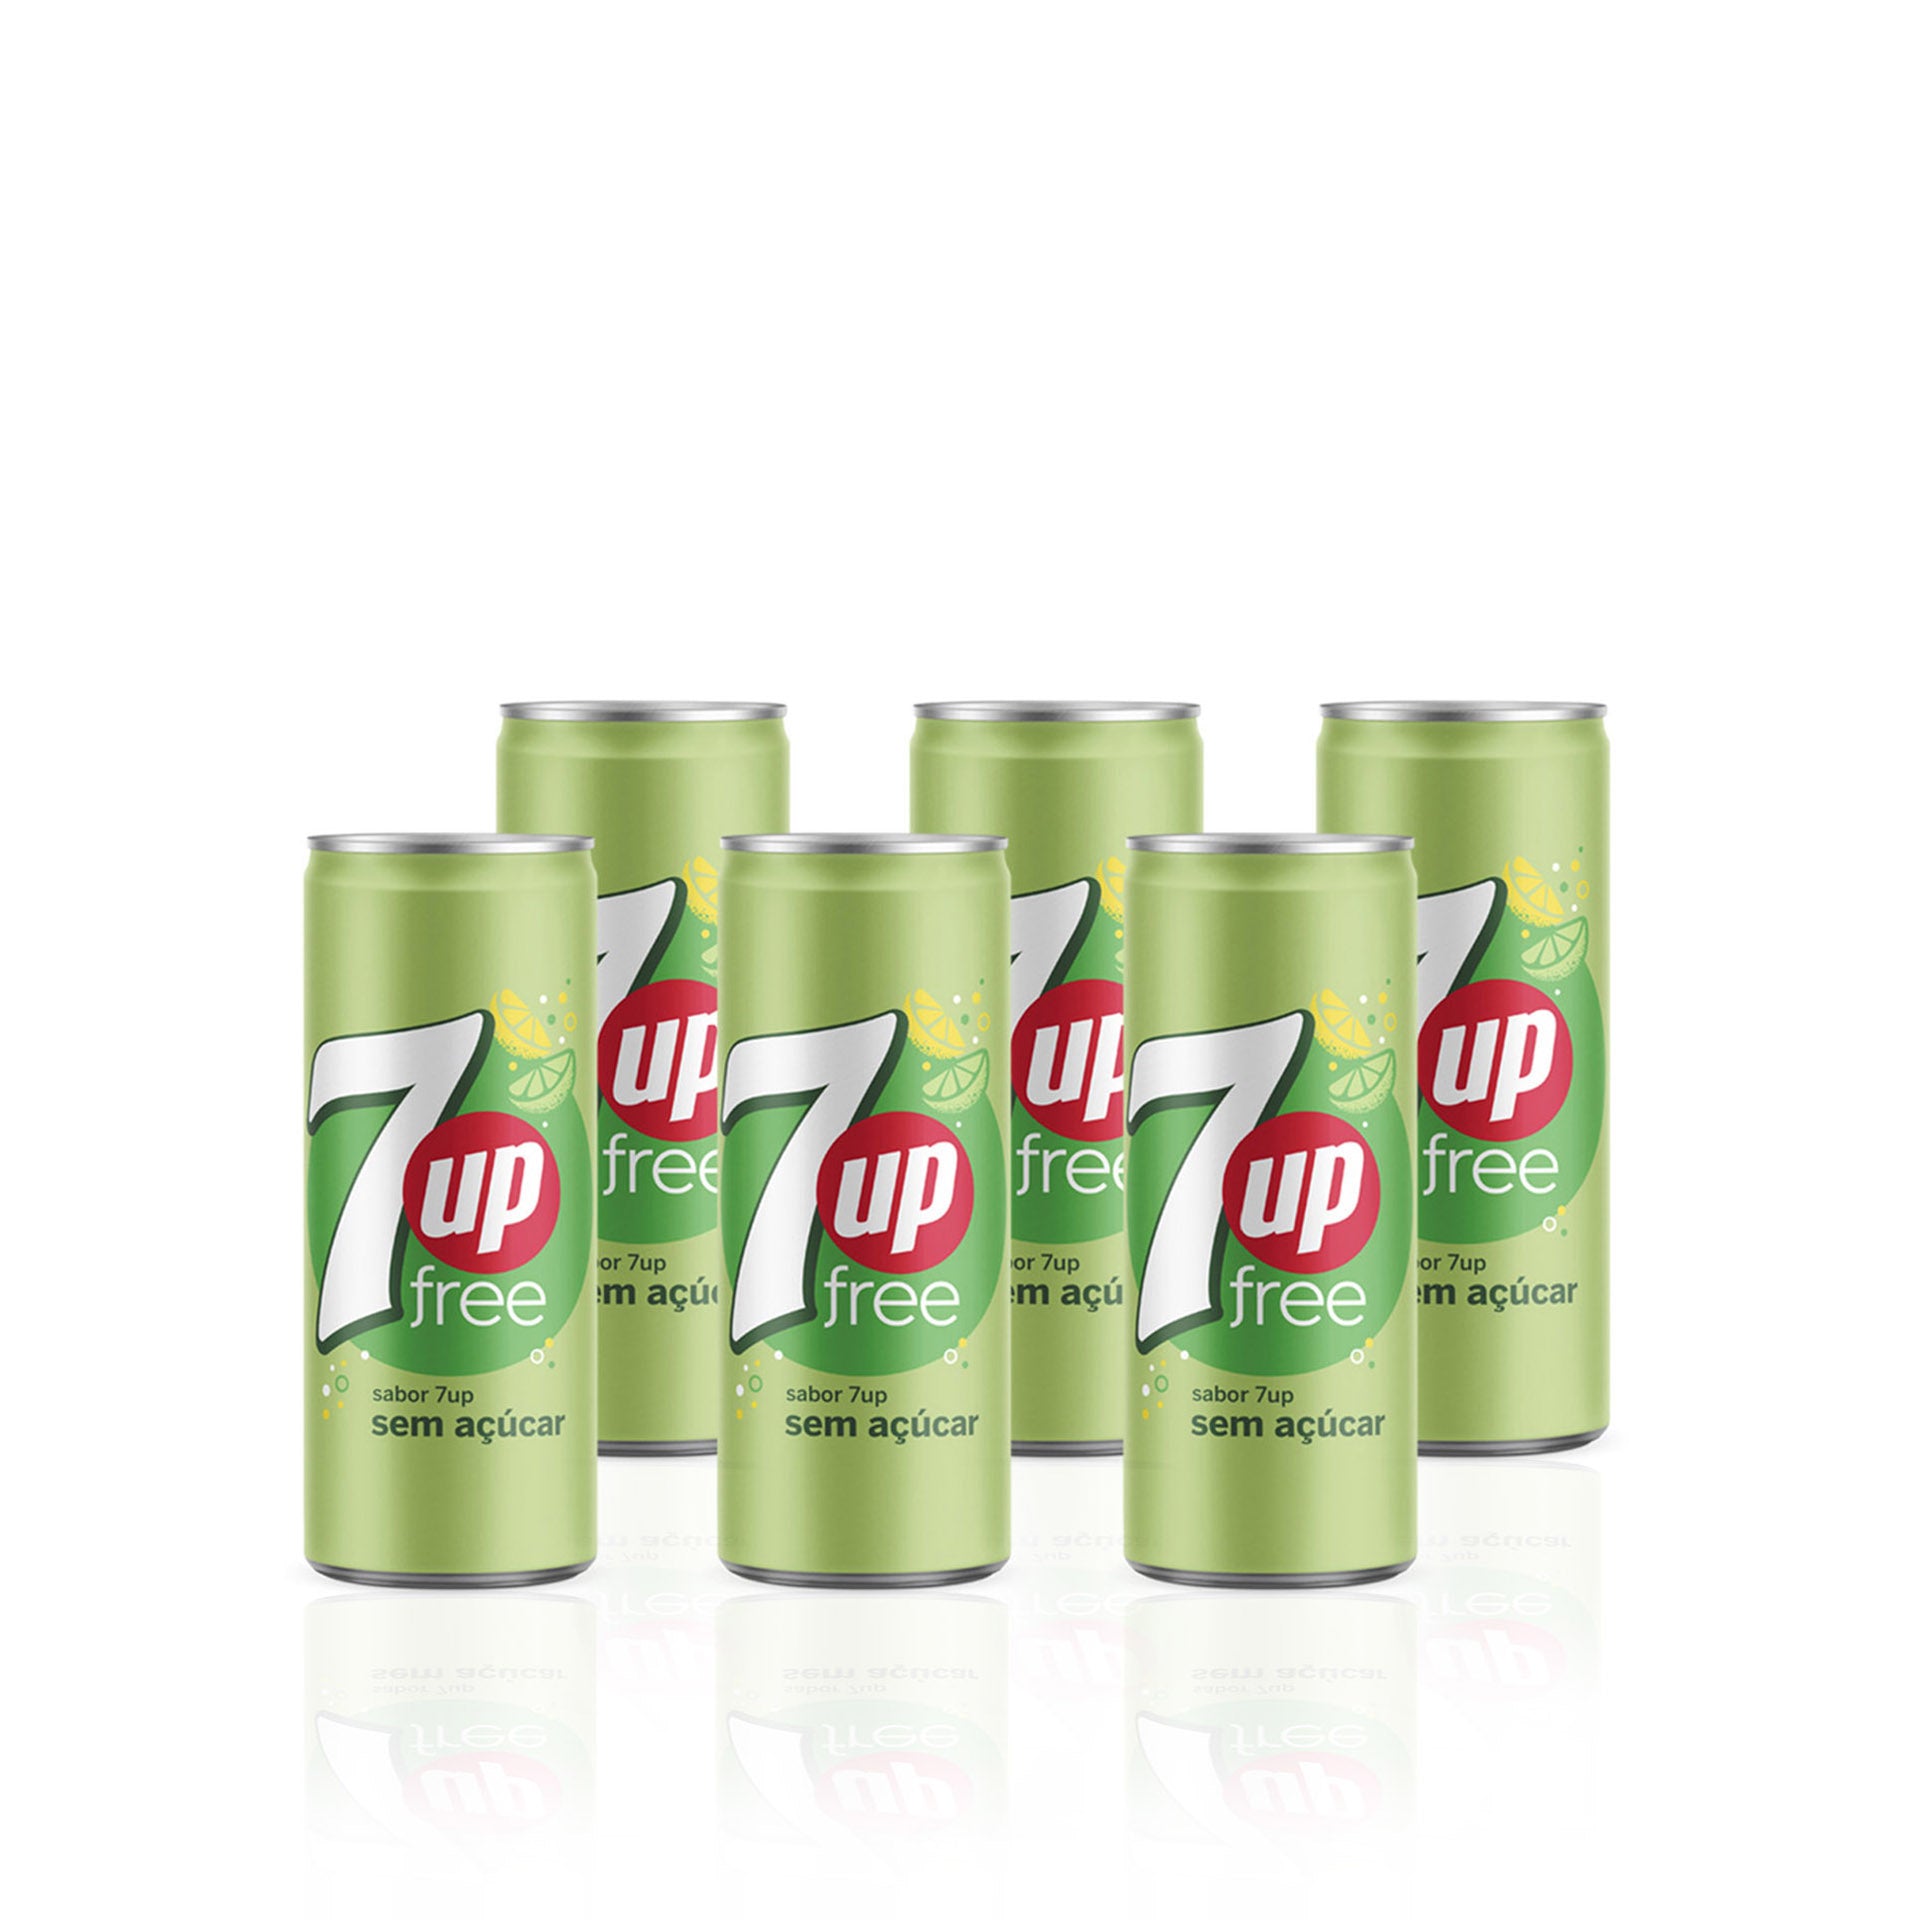 7UP Free Lata 33 cl - Pack 6 x 33 cl